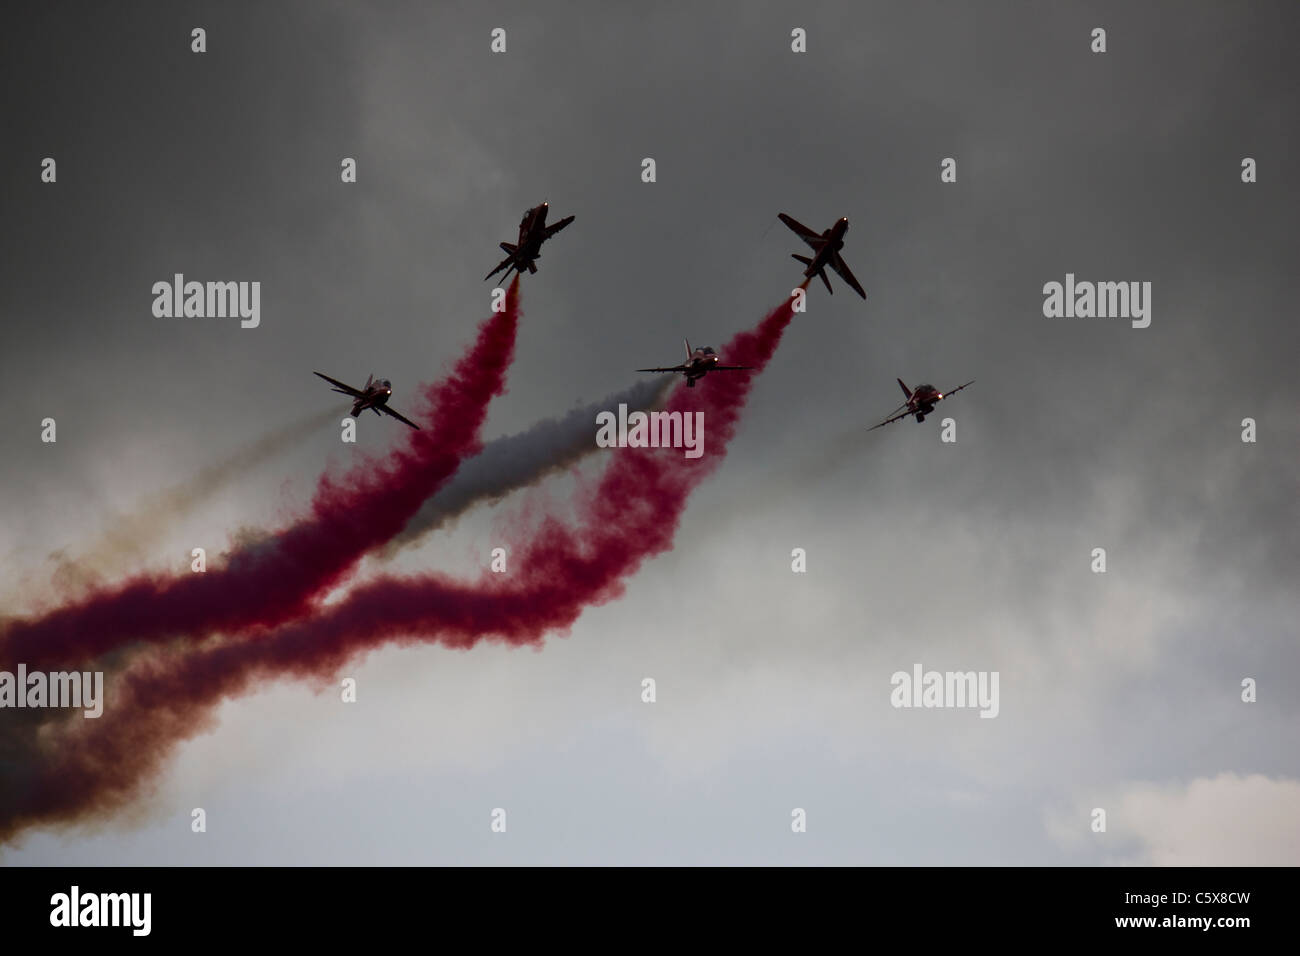 The Red Arrows RAF aerobatic display team flying through stormy clouds Stock Photo